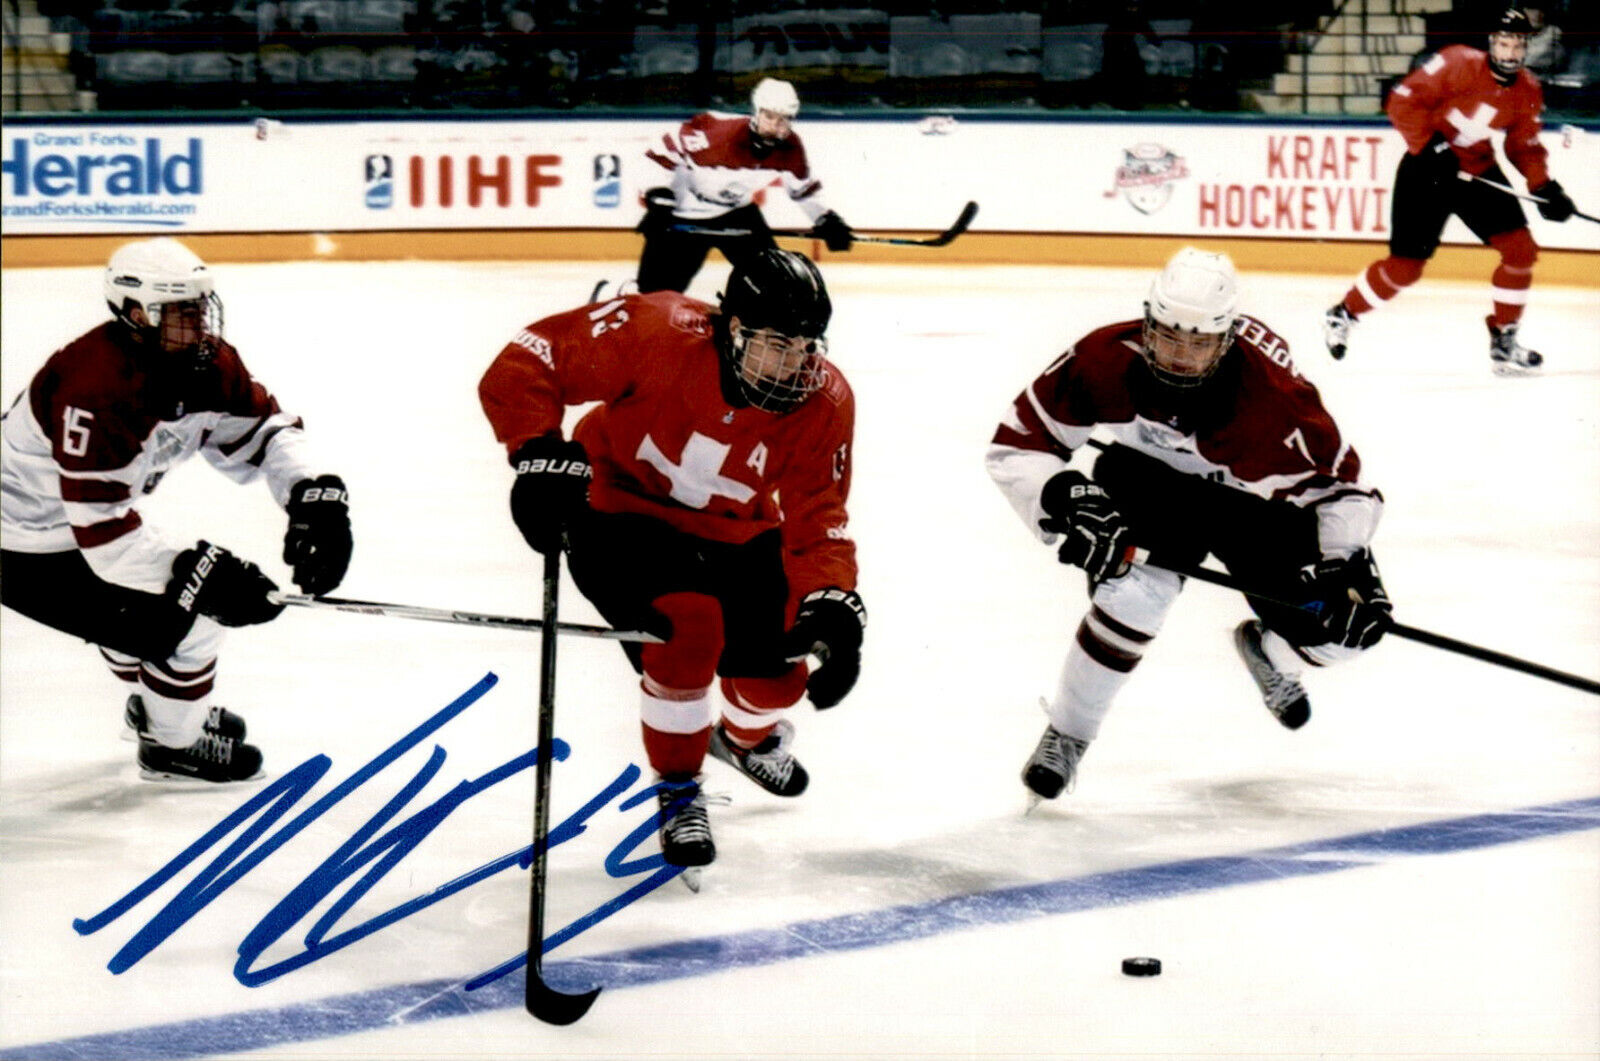 Nico Hischier SIGNED autograph 4x6 Photo Poster painting TEAM SWITZERLAND / NEW JERSEY DEVILS #3